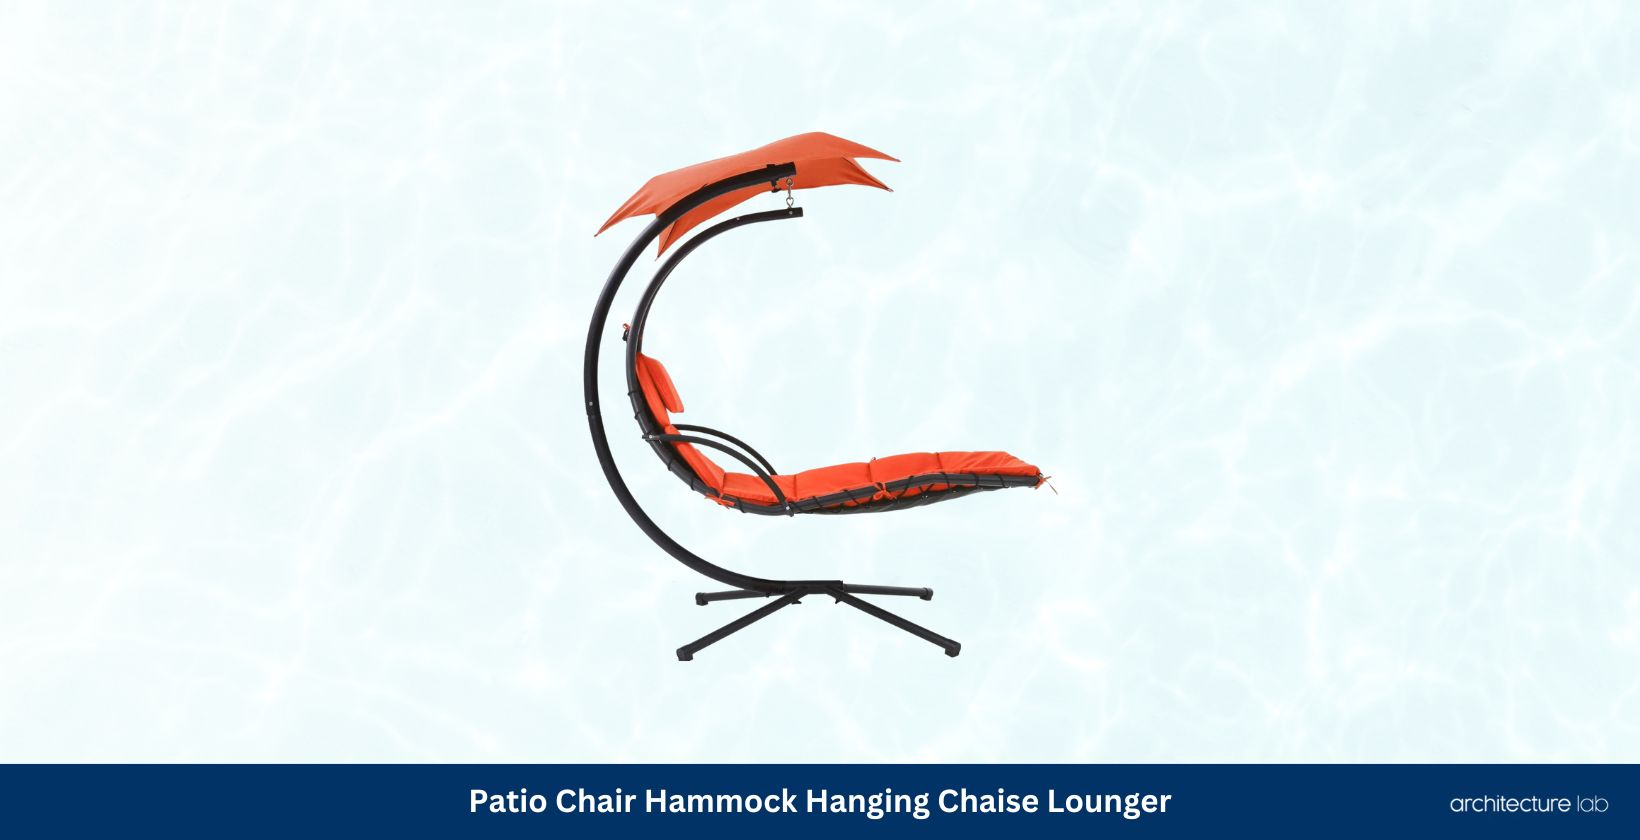 Patio chair hammock hanging chaise lounger